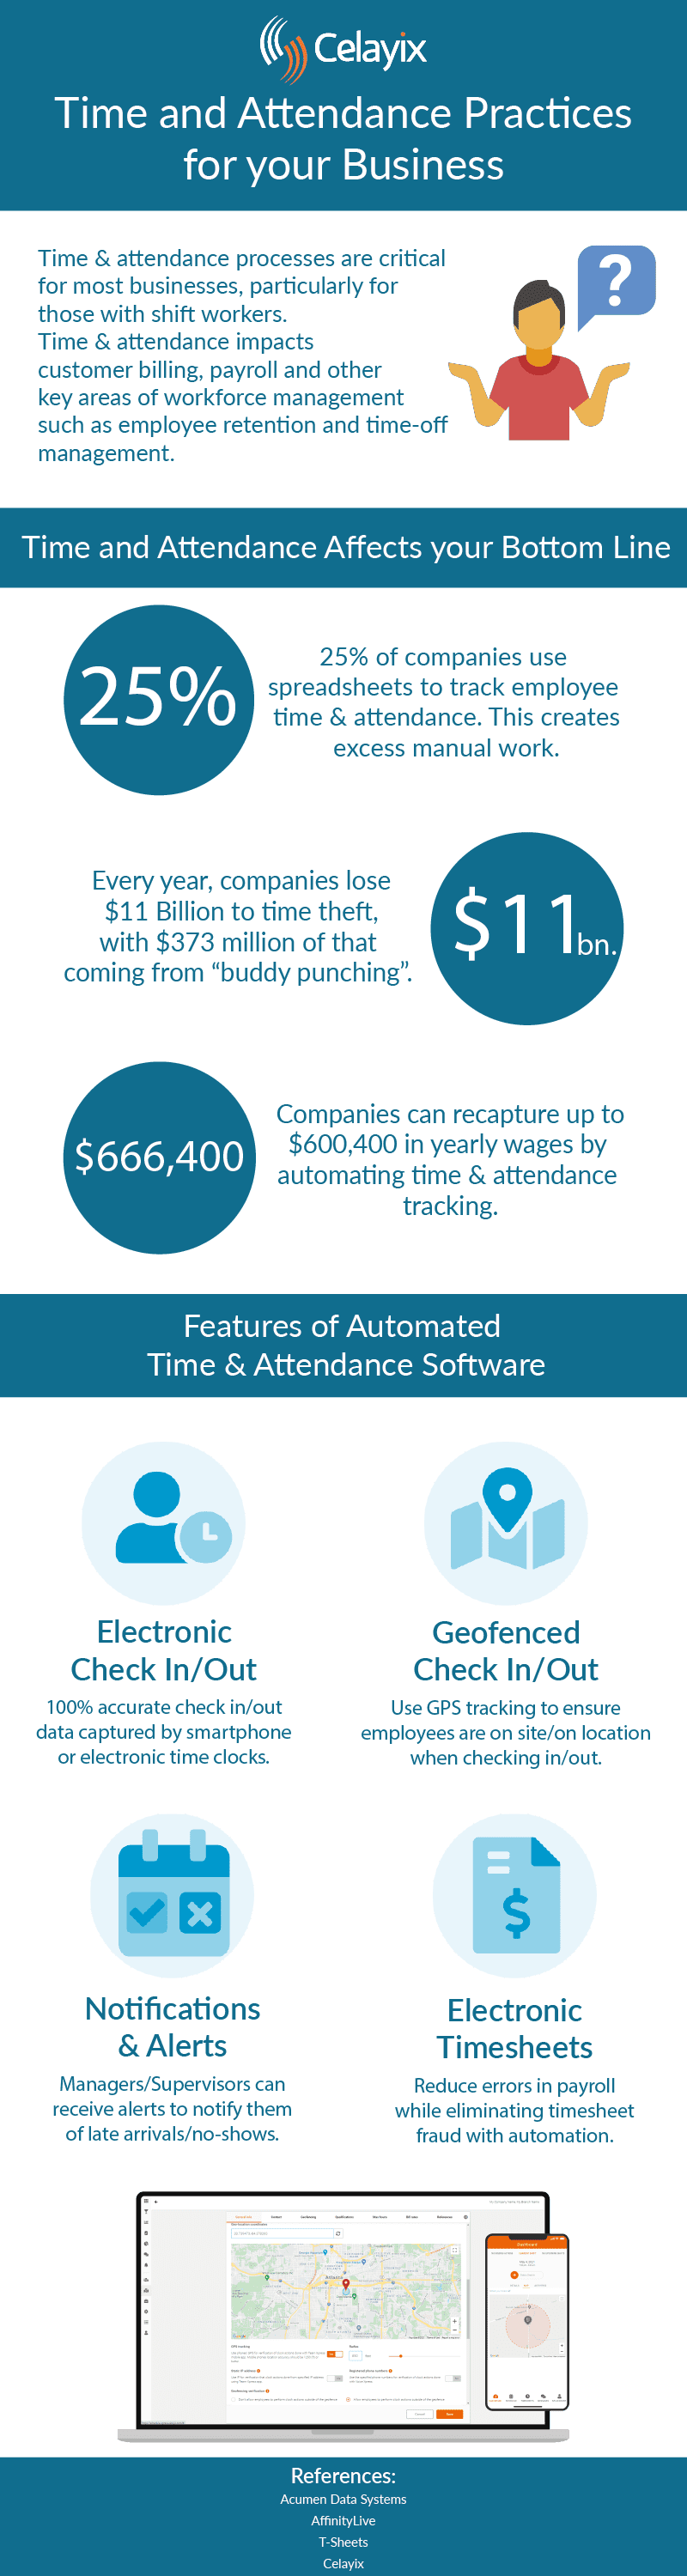 time and attendance practices infographic
